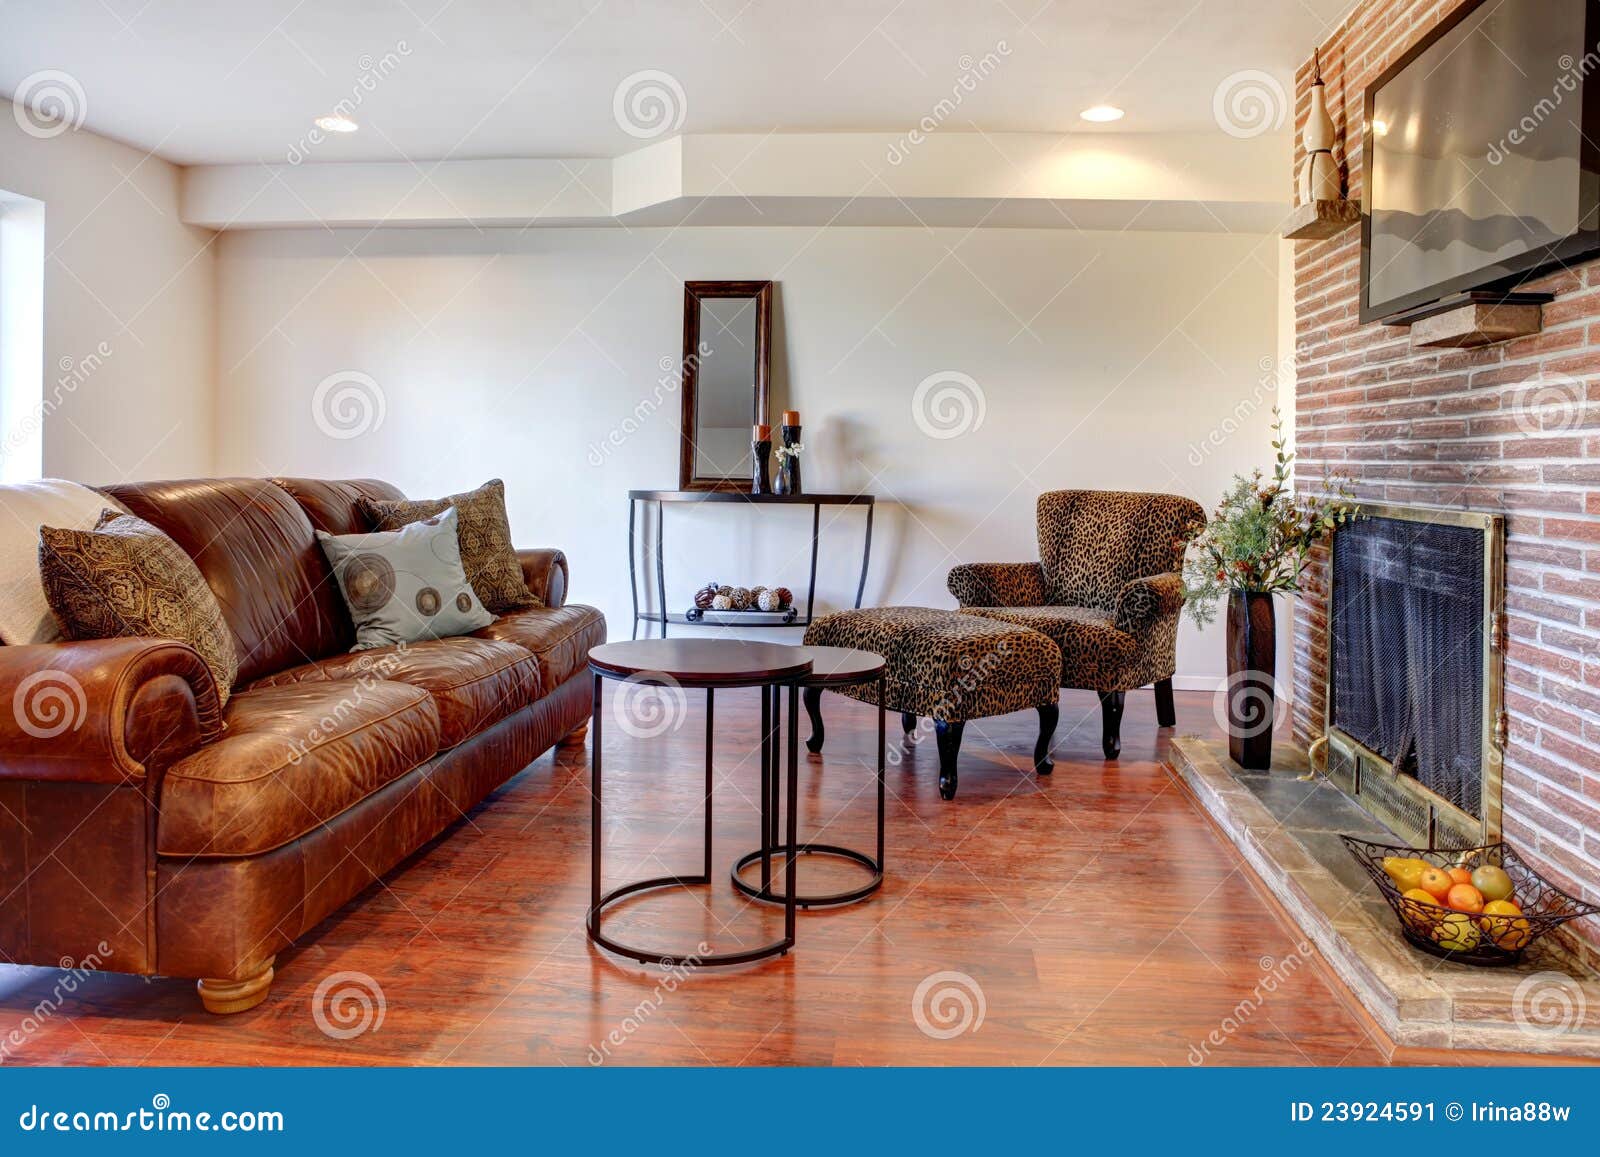 Living Room With Fireplace And TV Stock Image - Image of beautiful